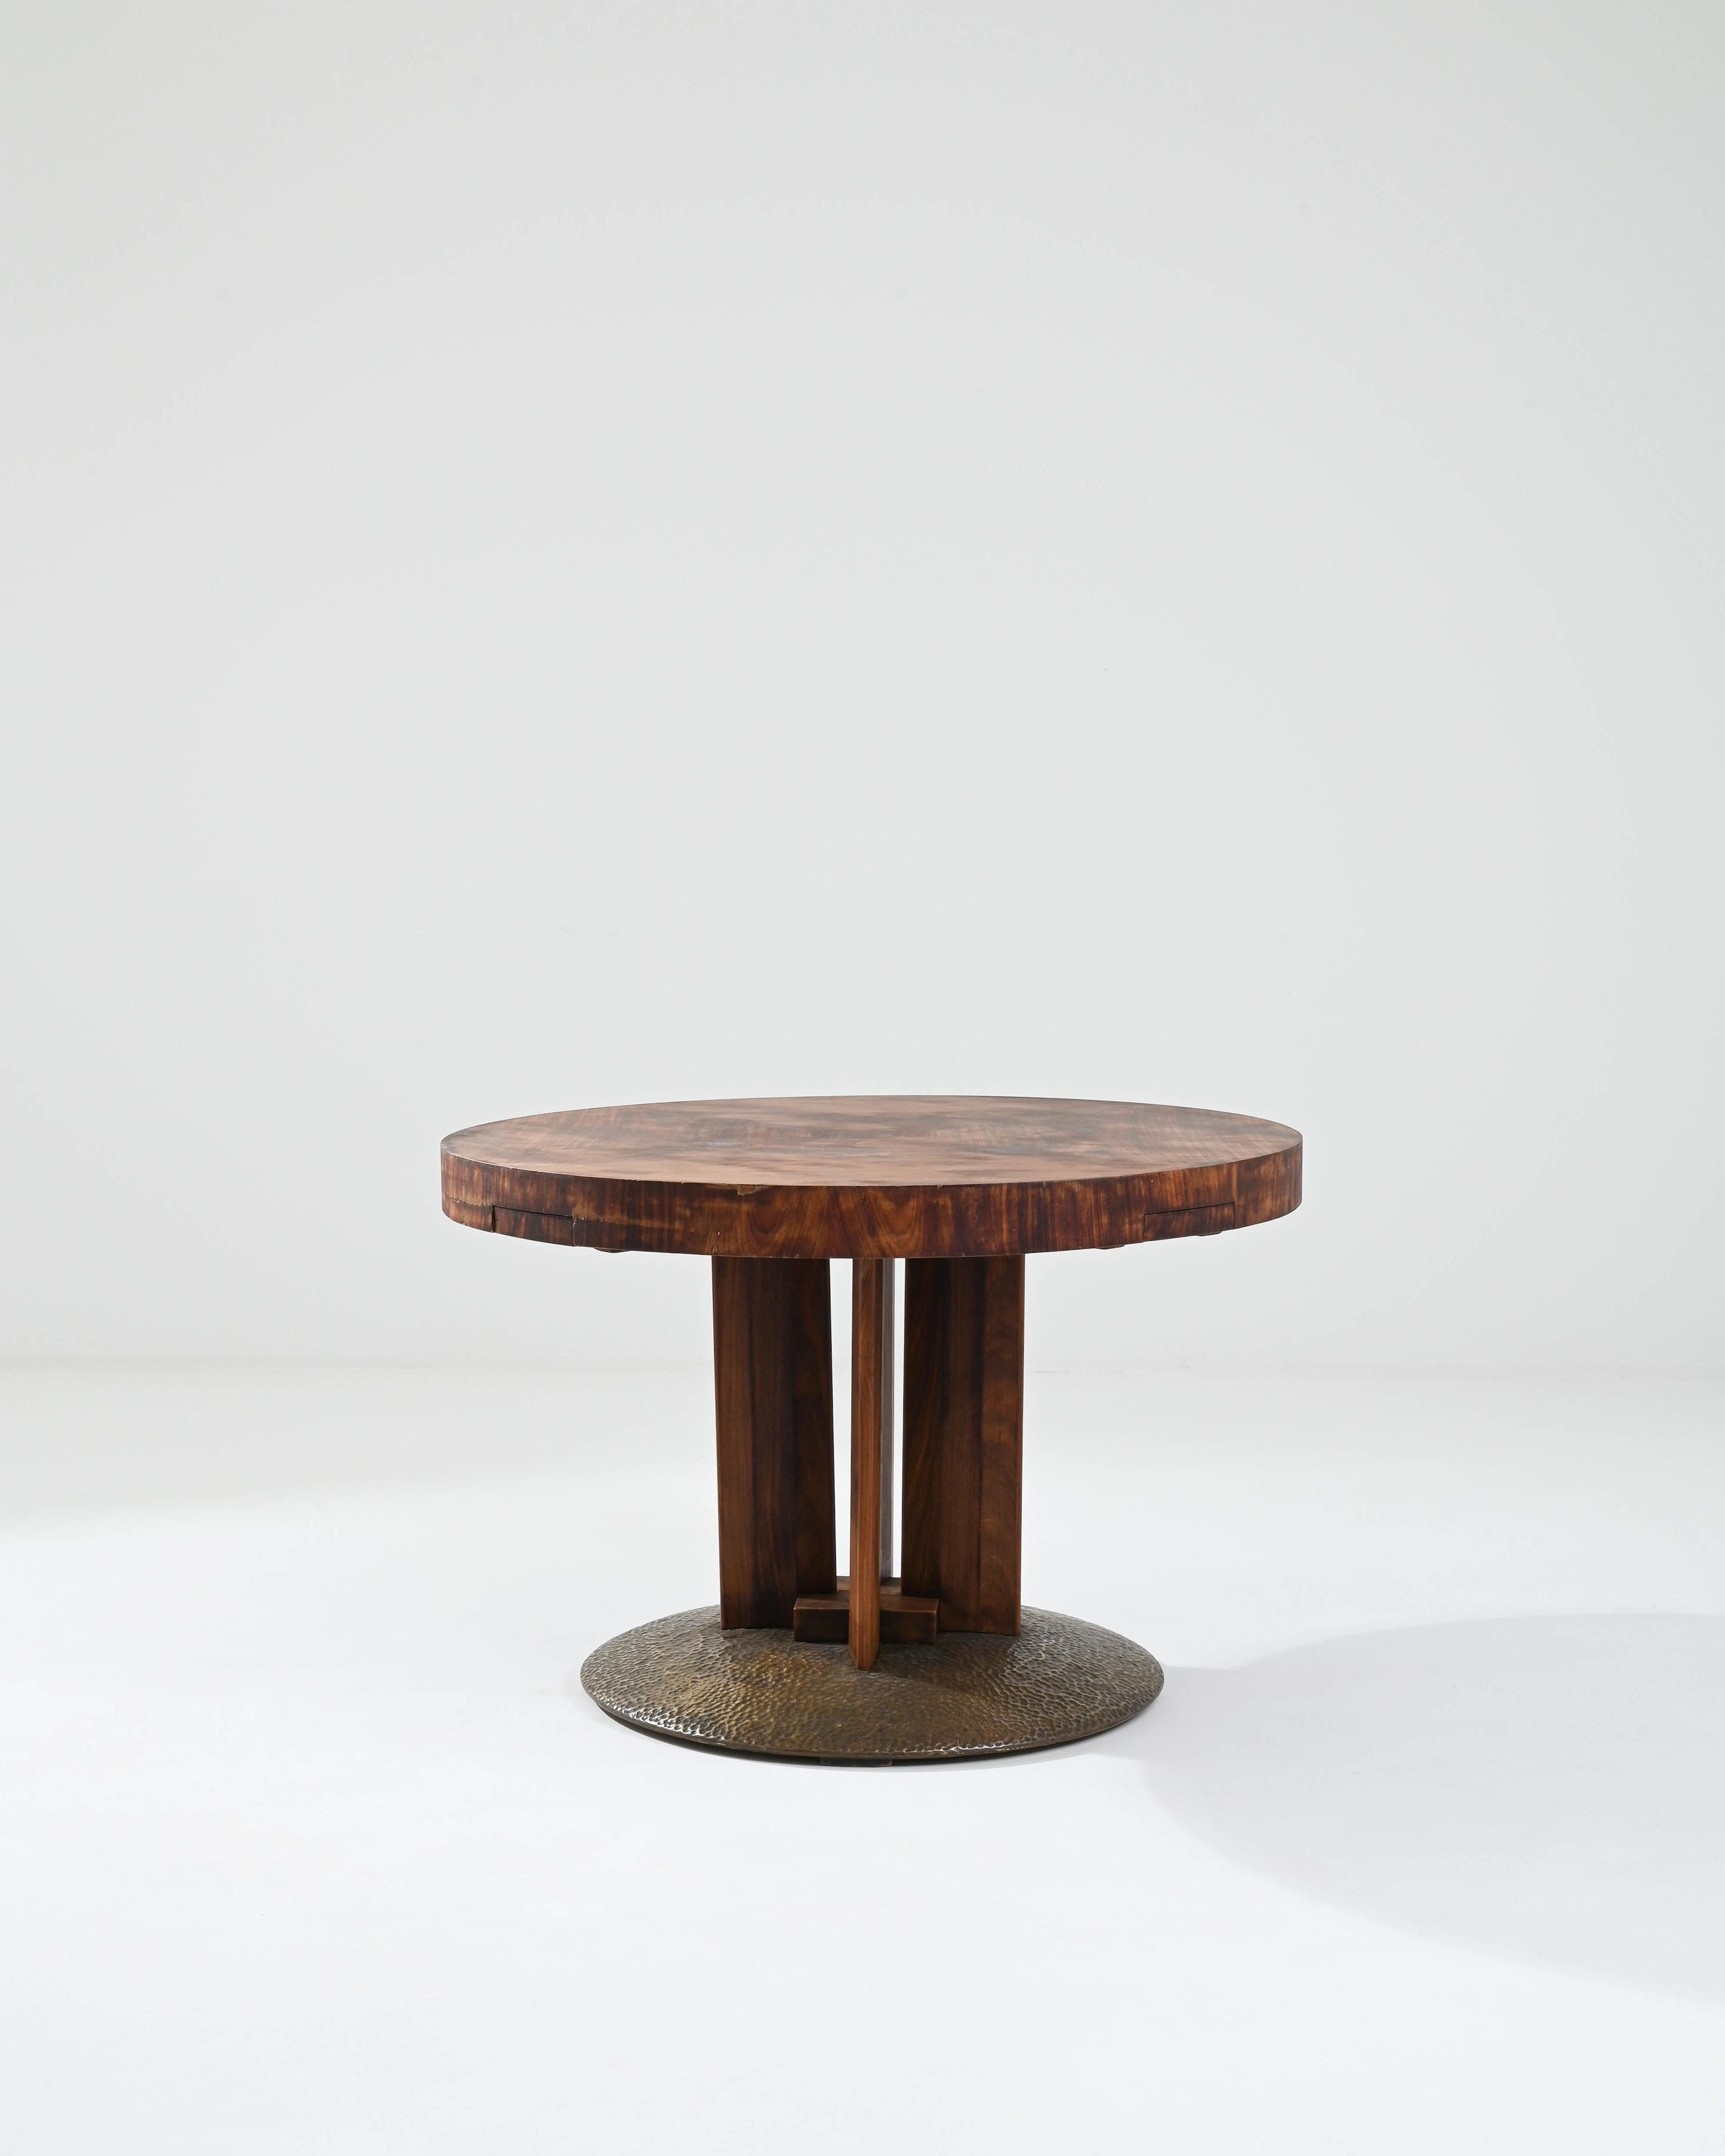 This iconic Art Deco bridge table evokes a moment in design history, capturing both the elegant simplicity and the revelry of the roaring 20s. Made in Central Europe, the table seats four players: hidden compartments pull out from the edges of the